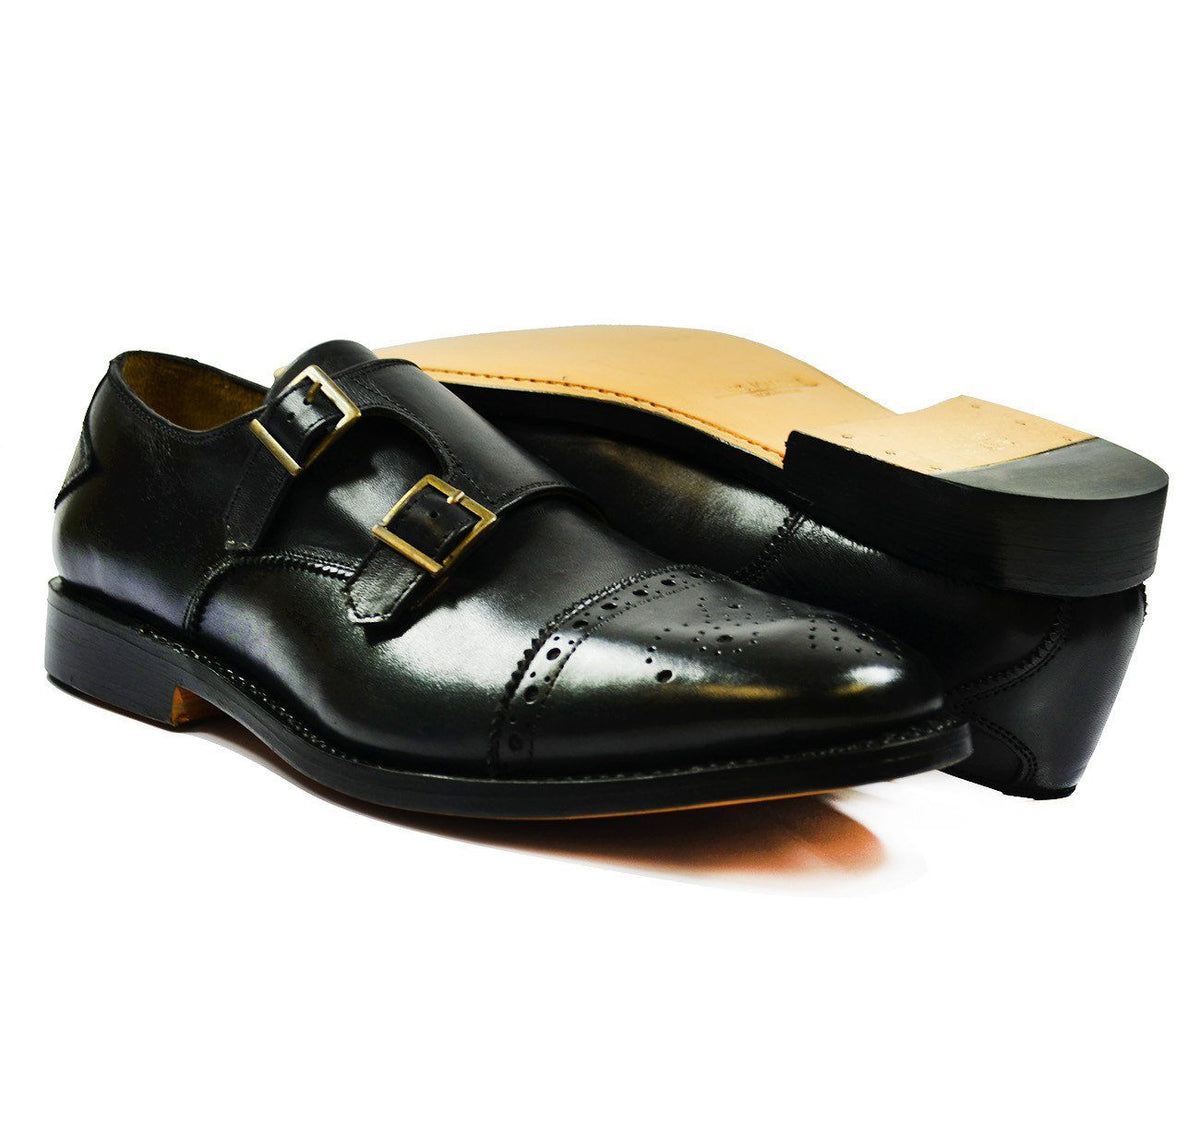 WILLIAMS Black Full Leather Monk Strap Dress Shoes | Paul Malone